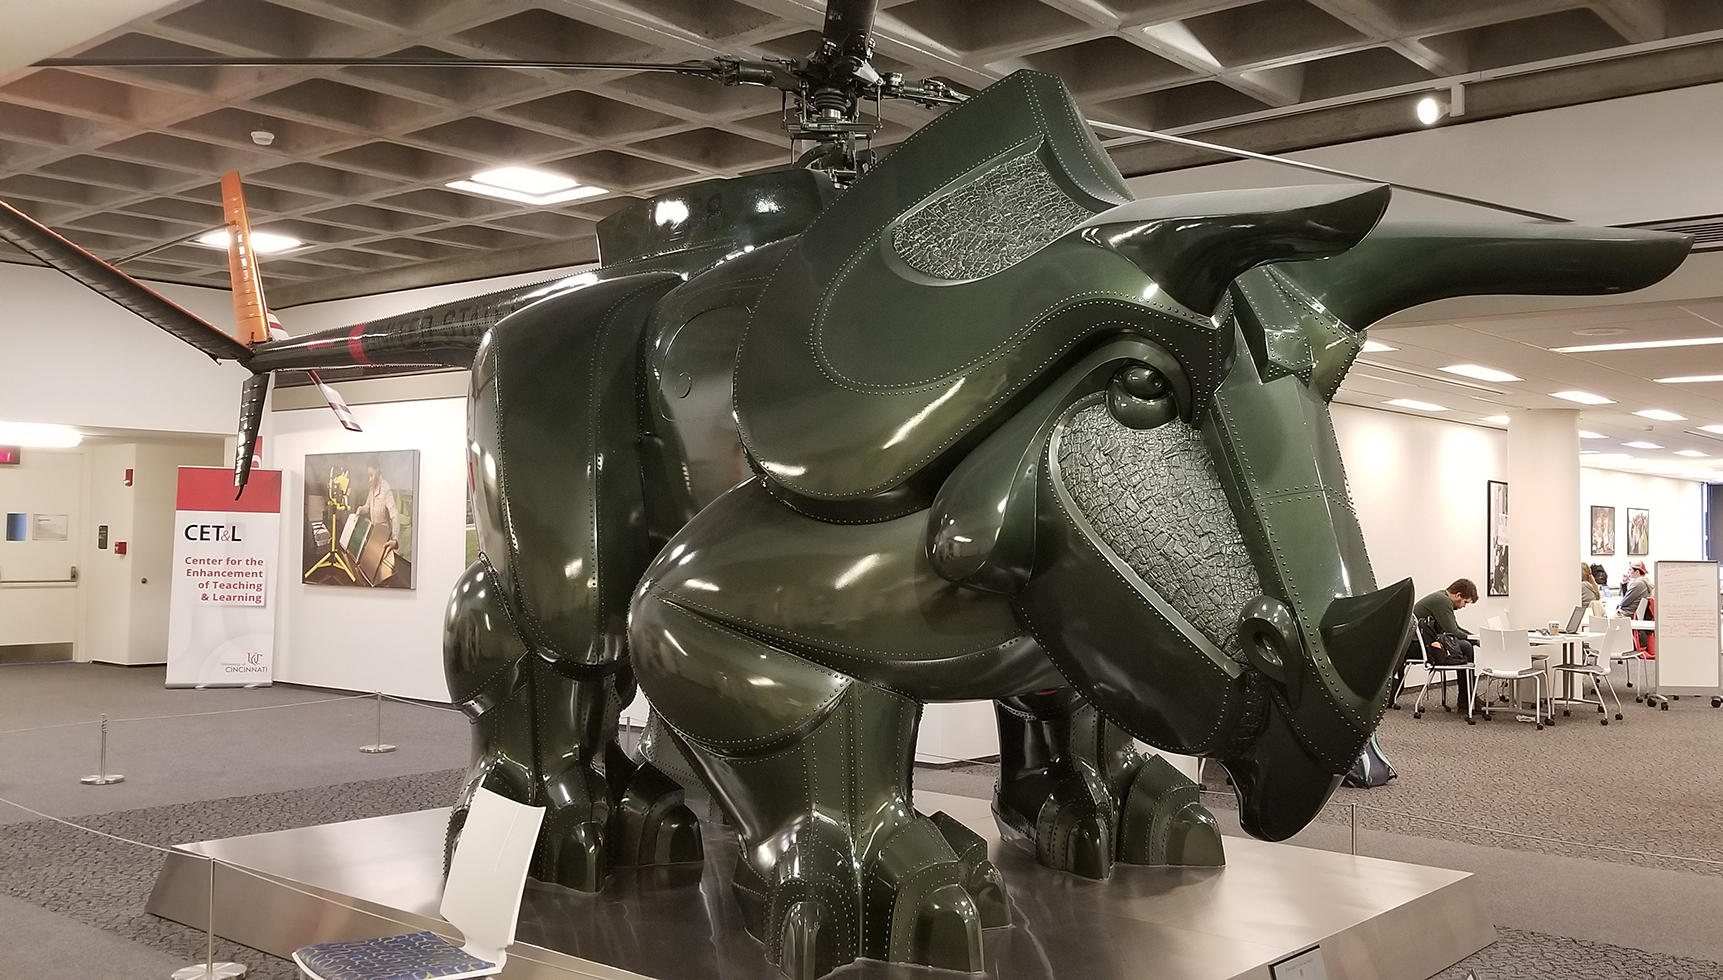 Patricia A. Renick’s 1977 sculpture to commemorate the US Bicentennial, Triceracopter: The Hope for the Obsolescence of War, is housed in the library just steps from where the press offices will soon be.